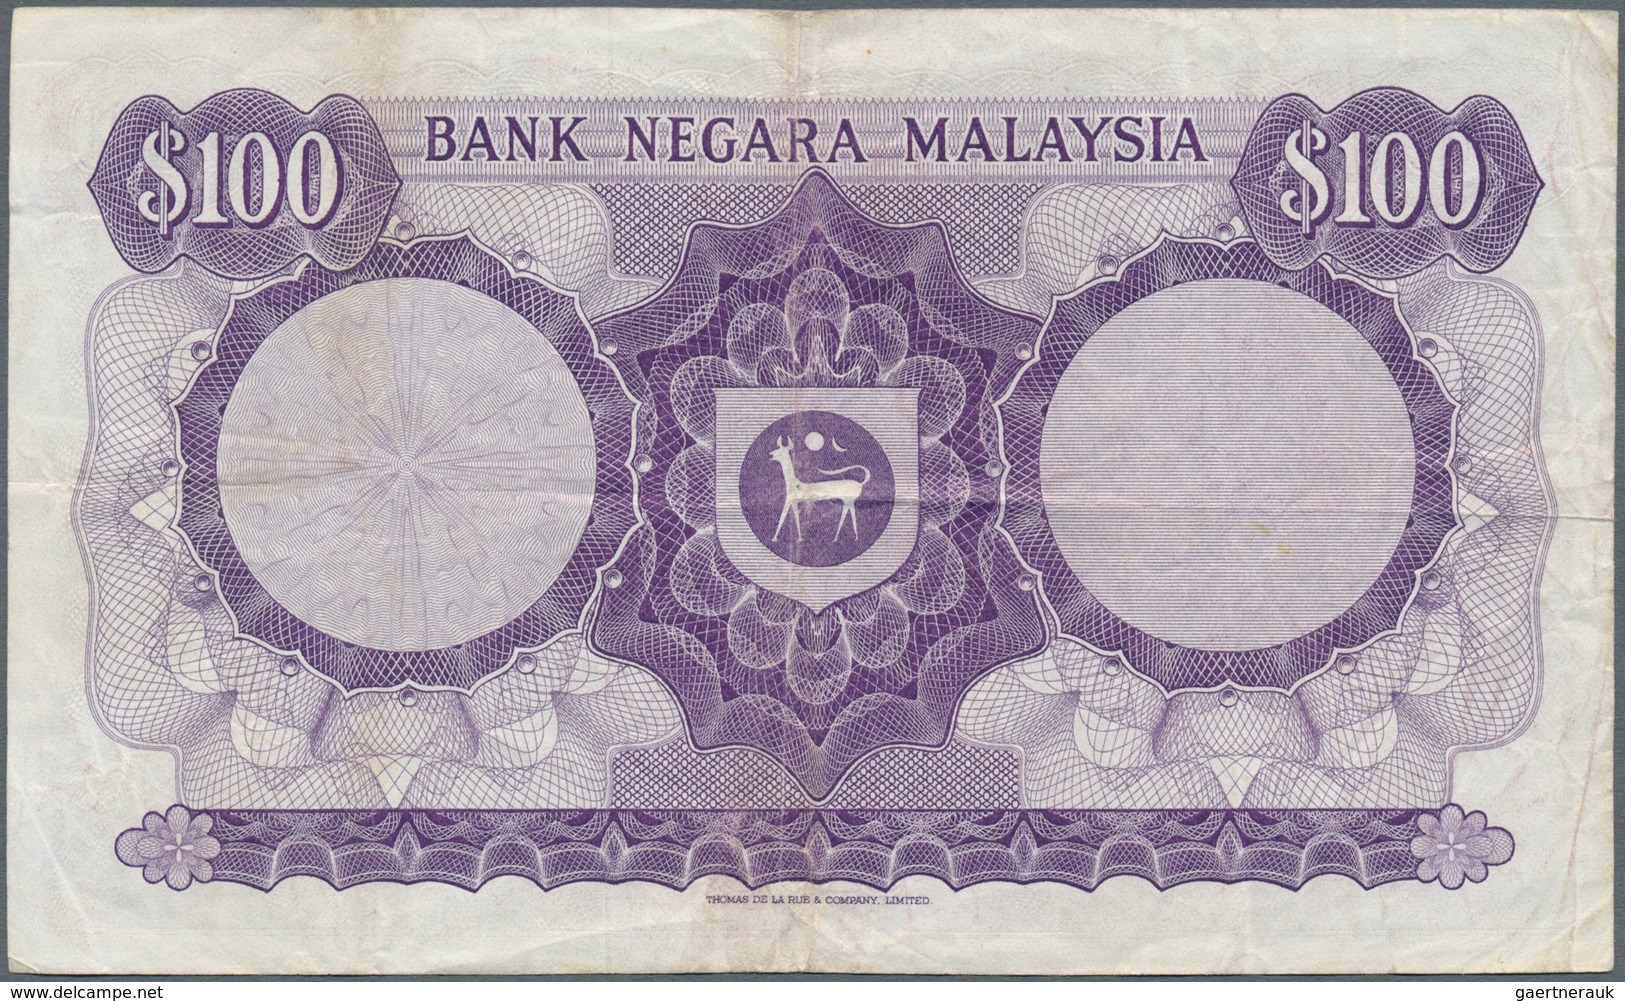 01987 Malaysia: 100 Ringgit ND P. 11 In Used Condition With Folds And Creases, Border Tear (1cm) At Upper - Malaysia